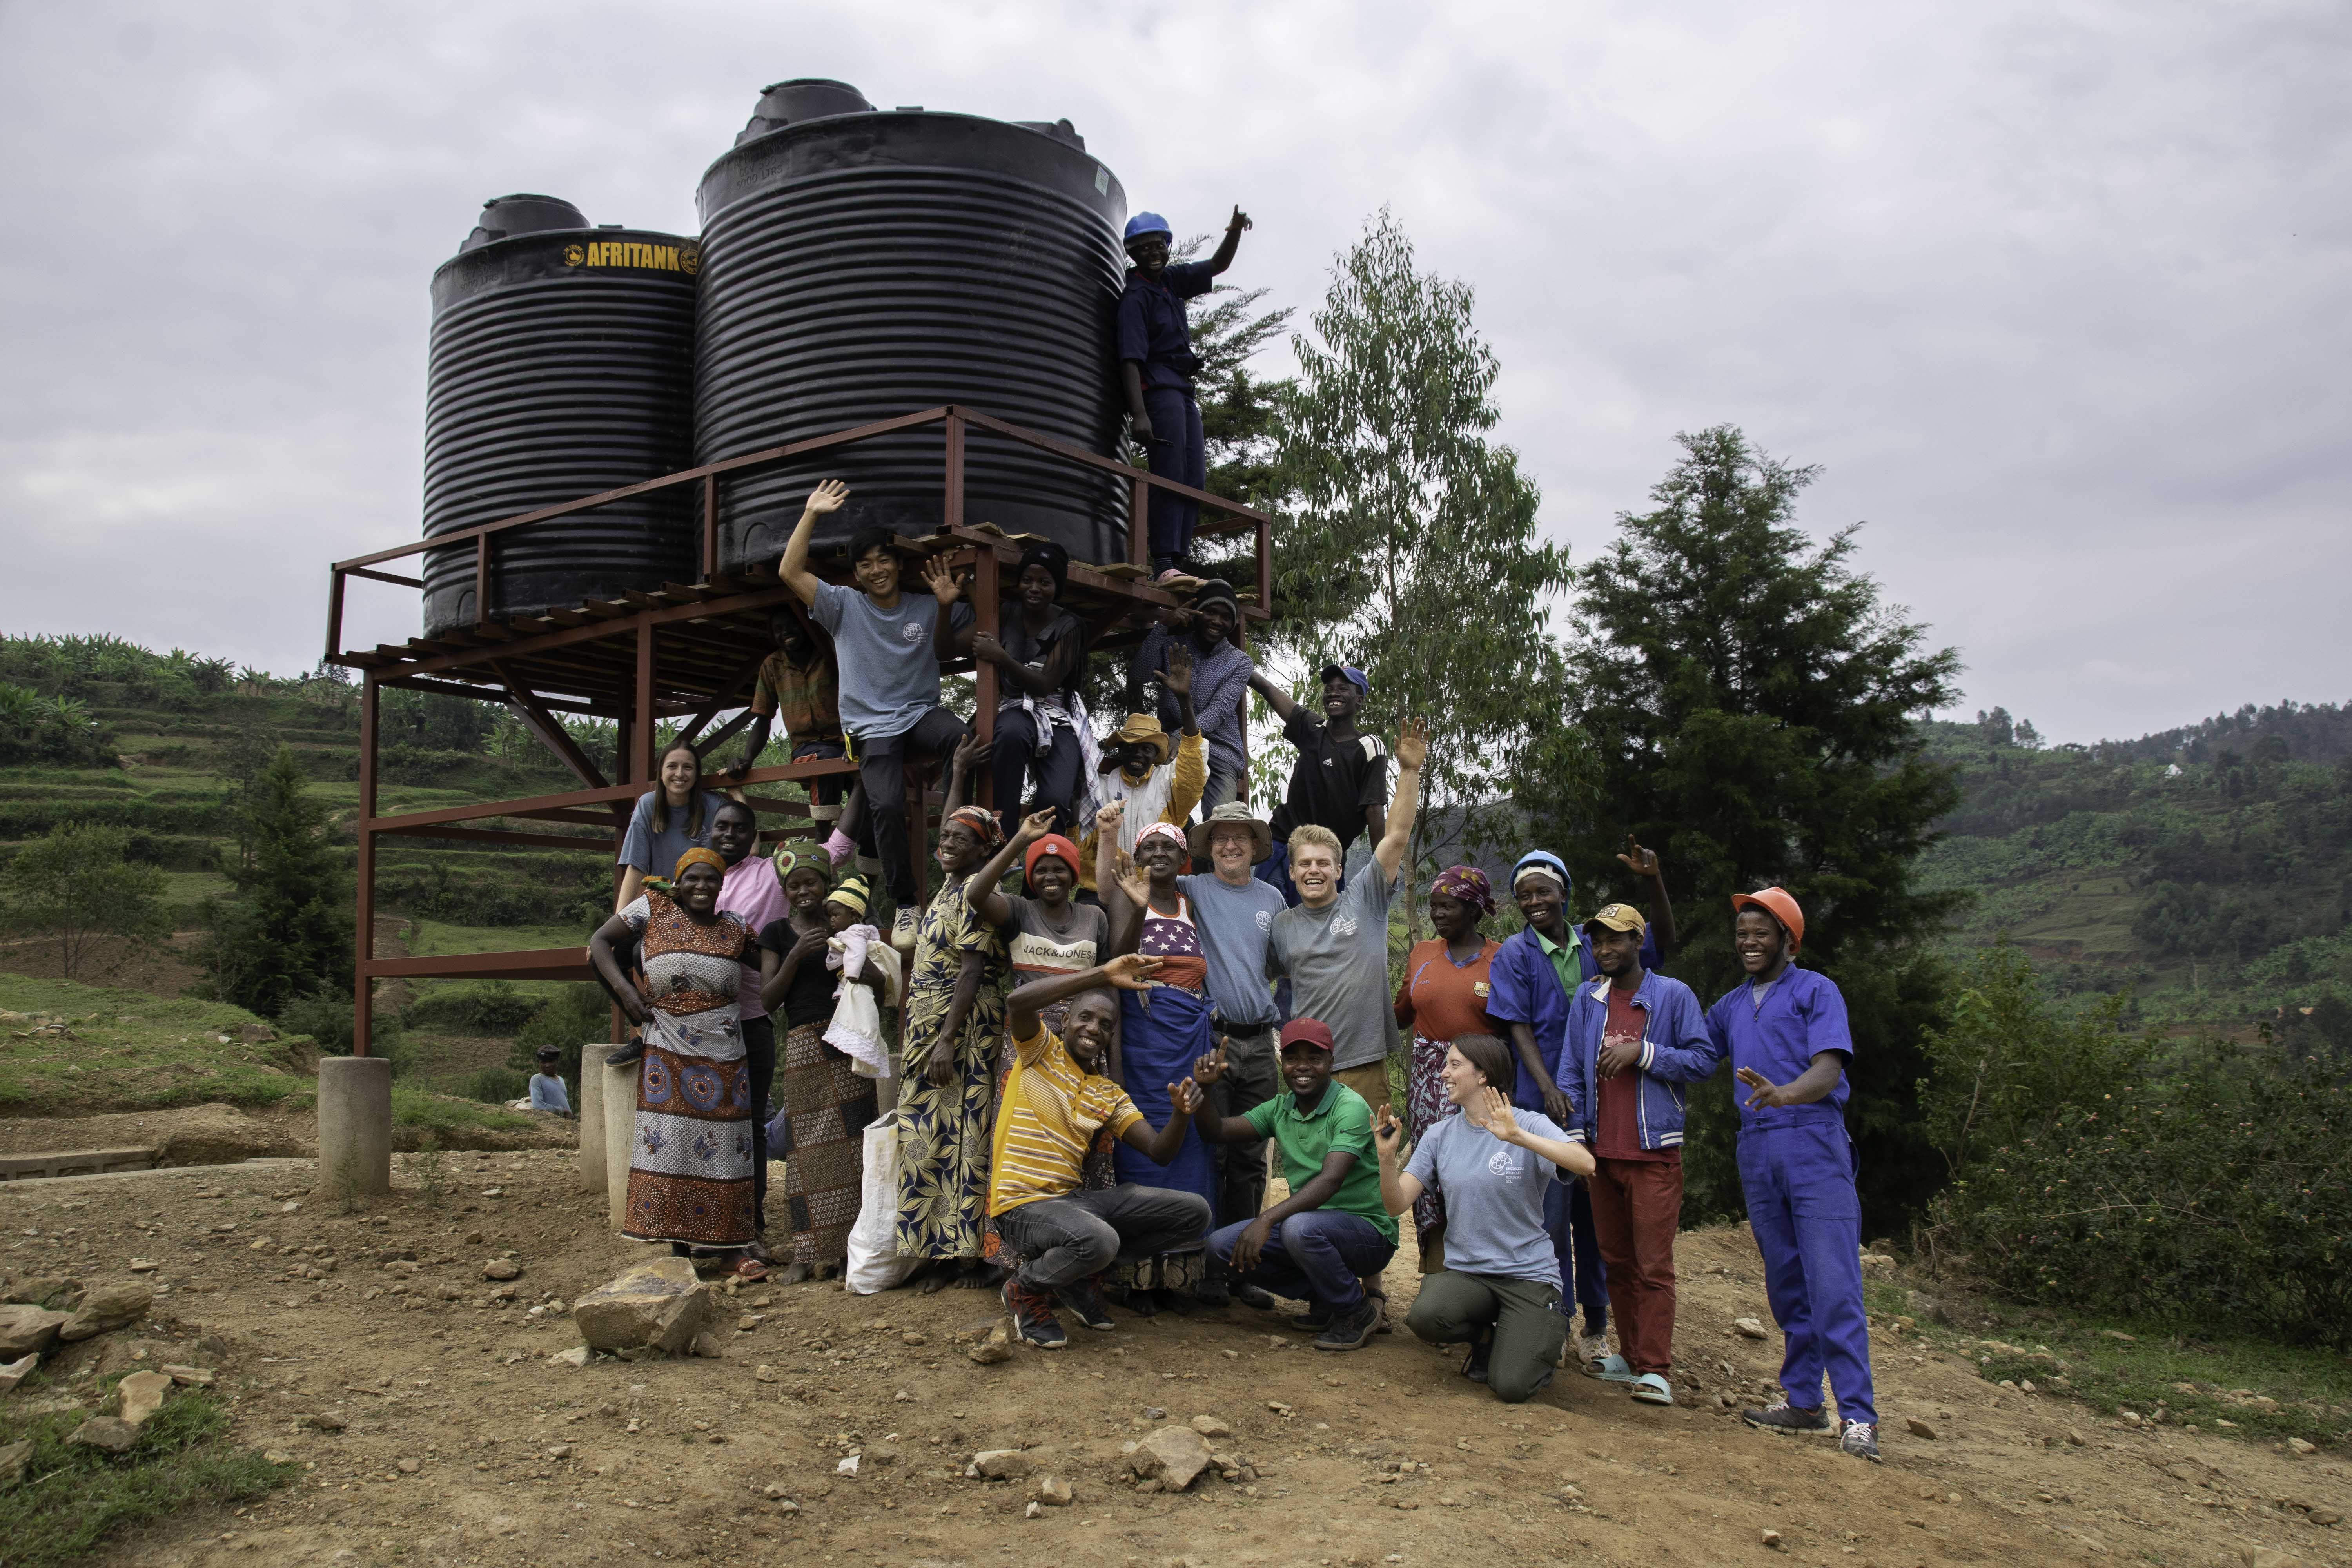 EWB traveled to Rwanda to implement a water filtration system. image link to story